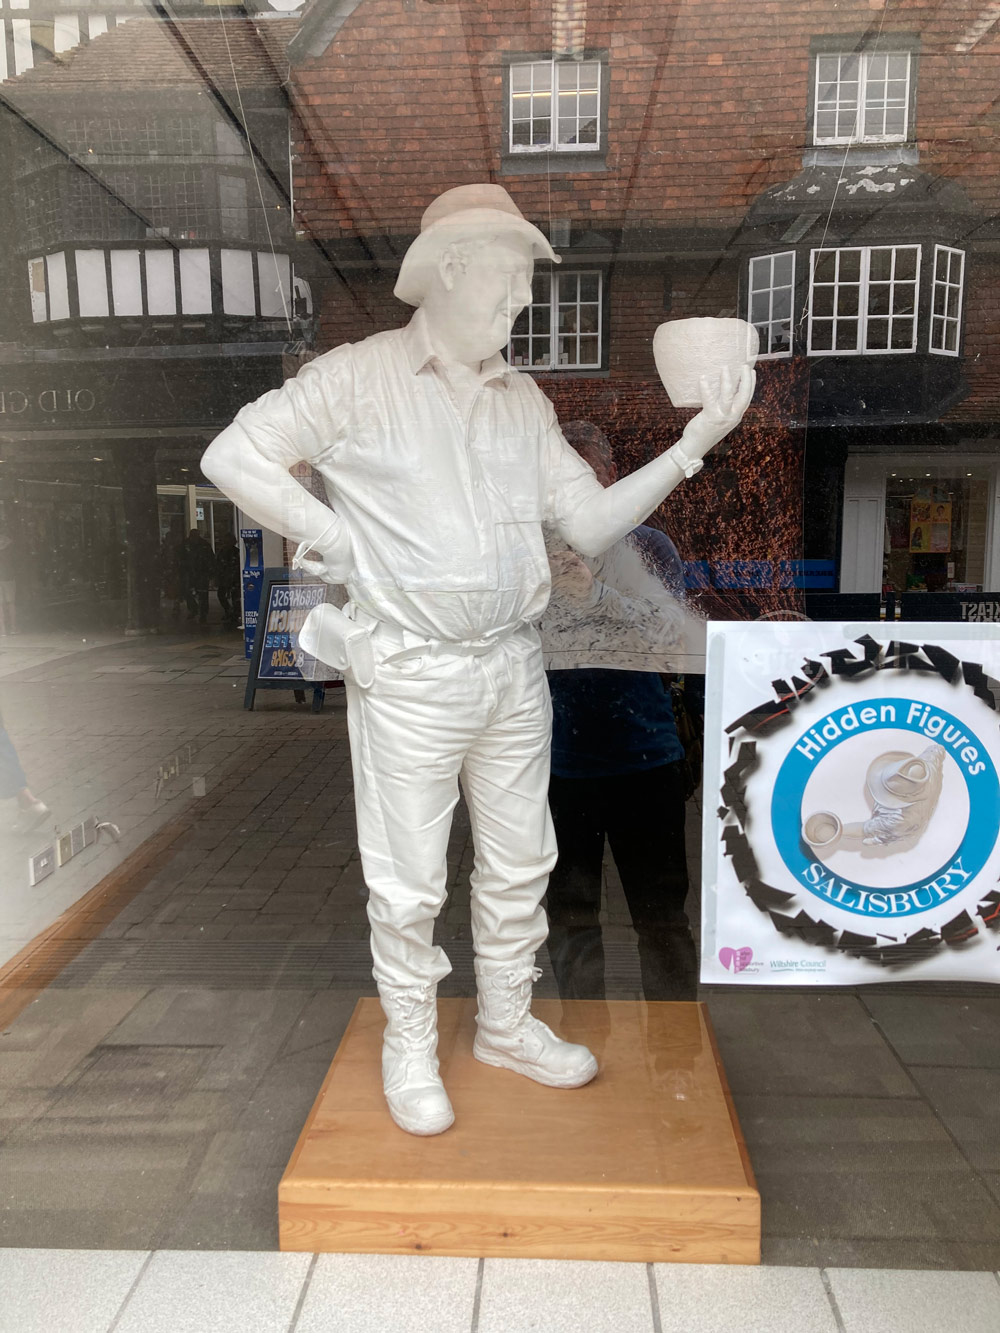 Are you digging the Hidden Figure in the shop front?